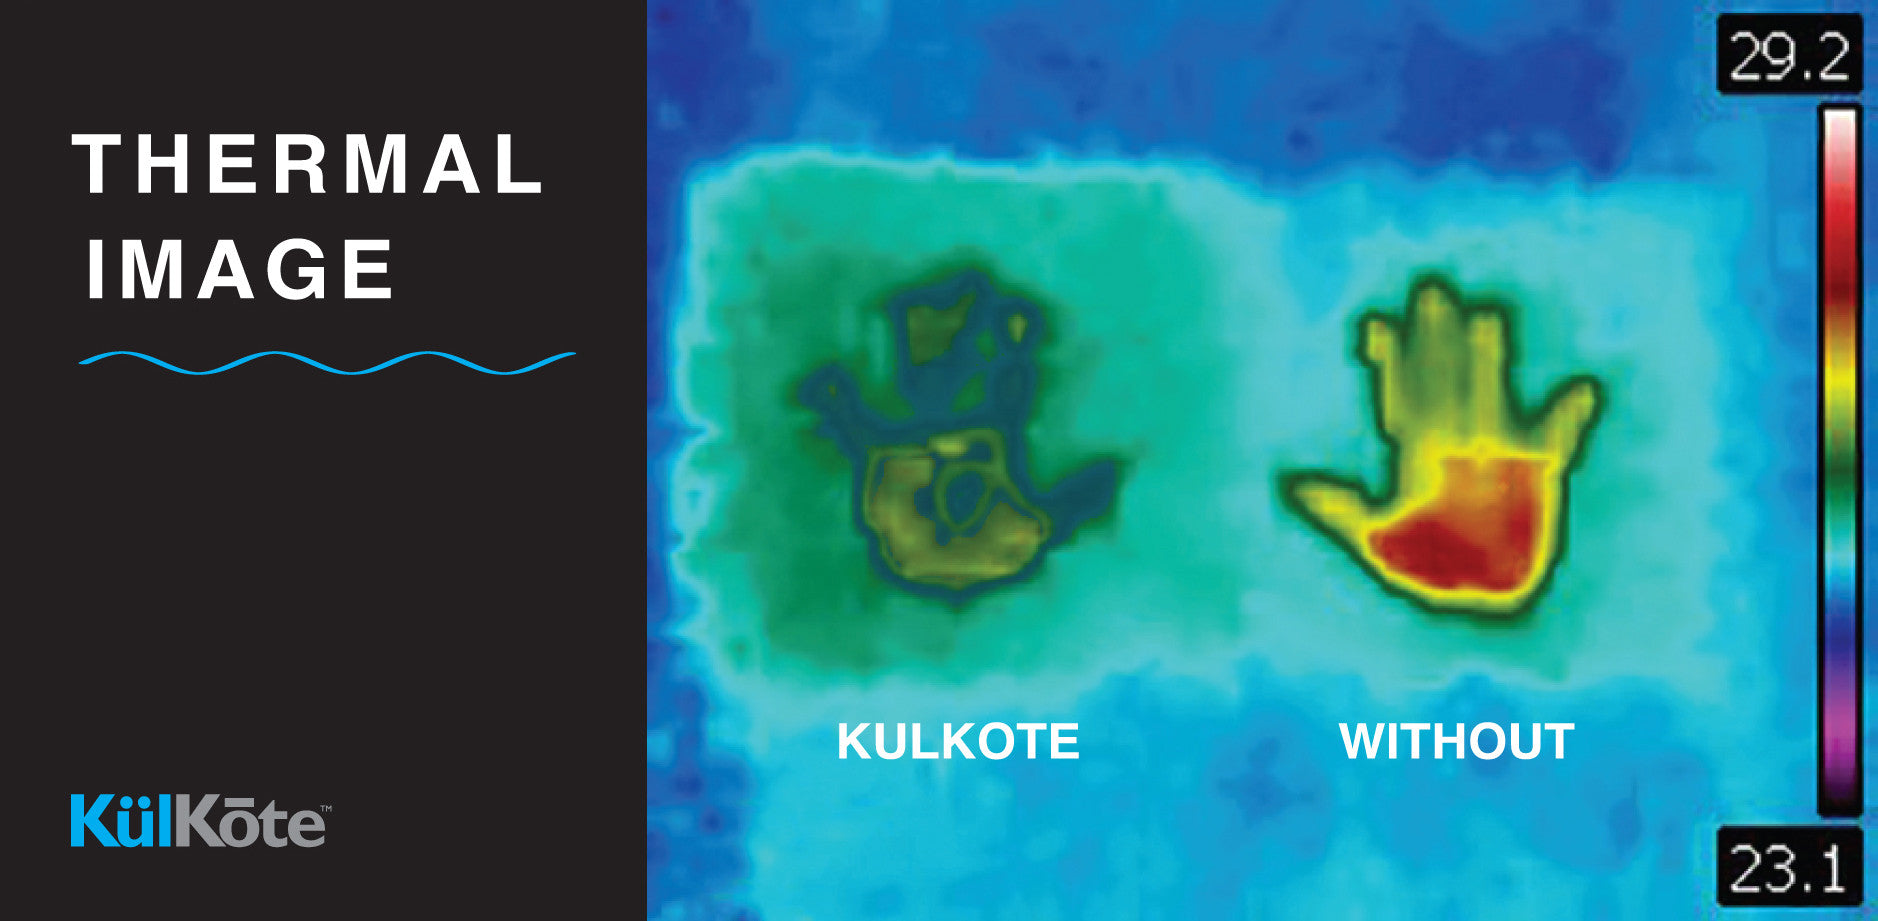 KulKote is now Available.